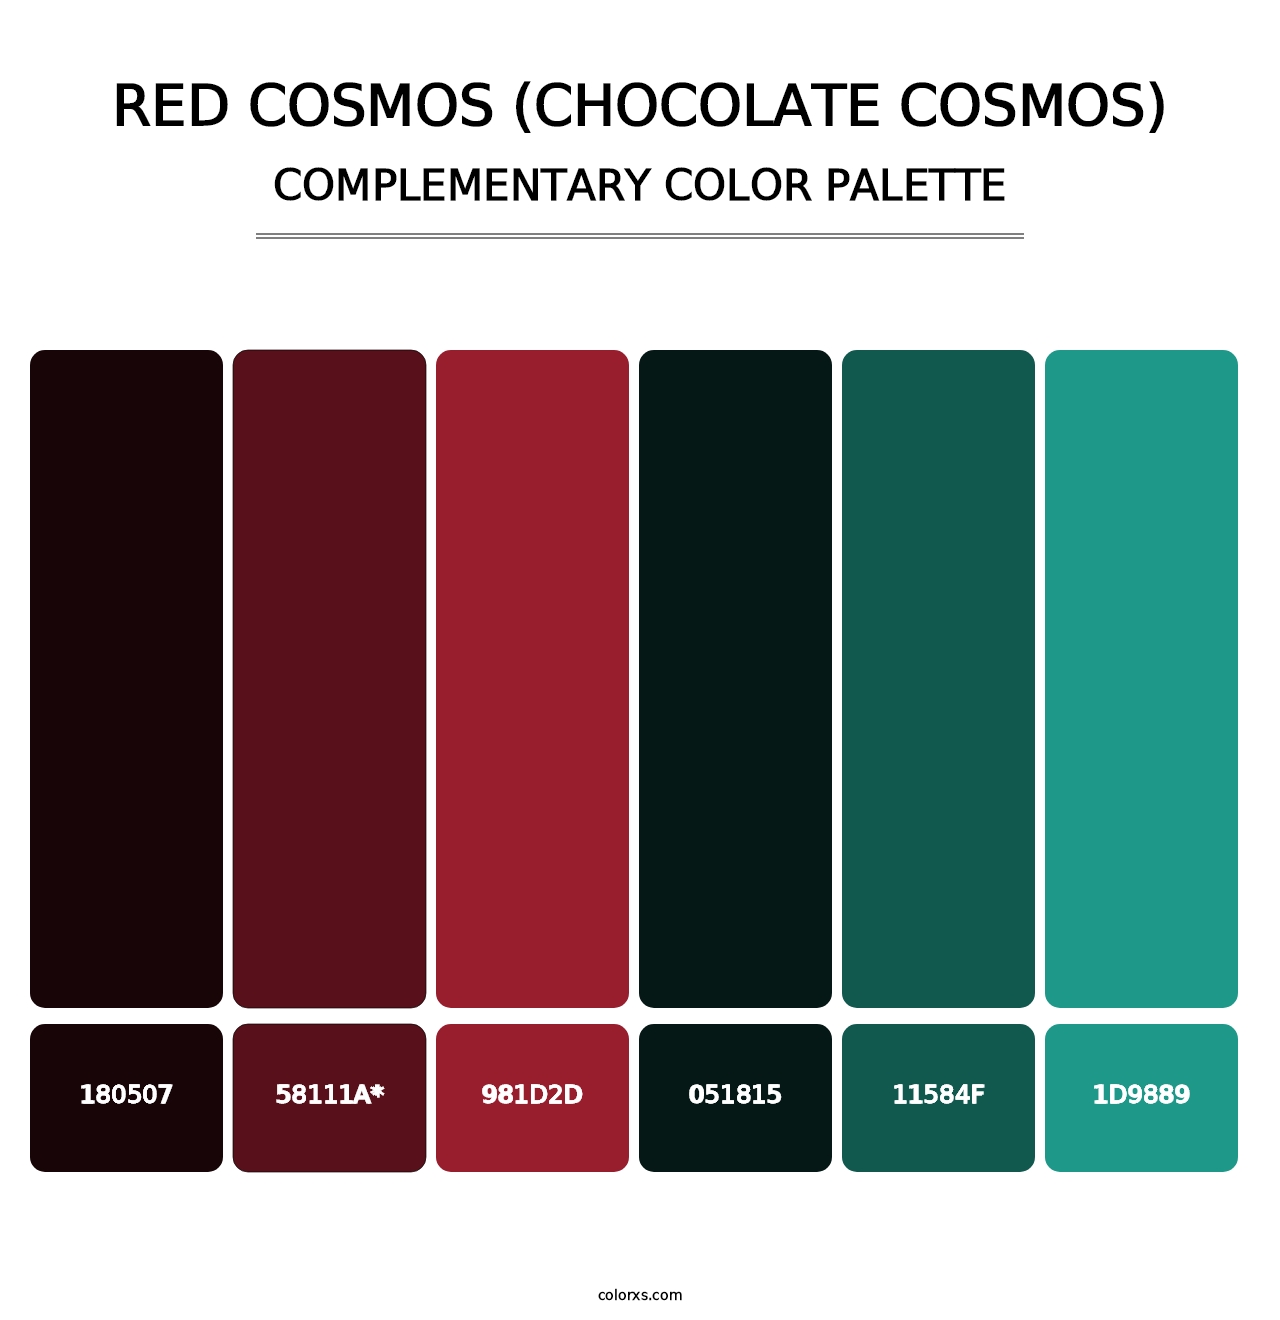 Red Cosmos (Chocolate Cosmos) - Complementary Color Palette